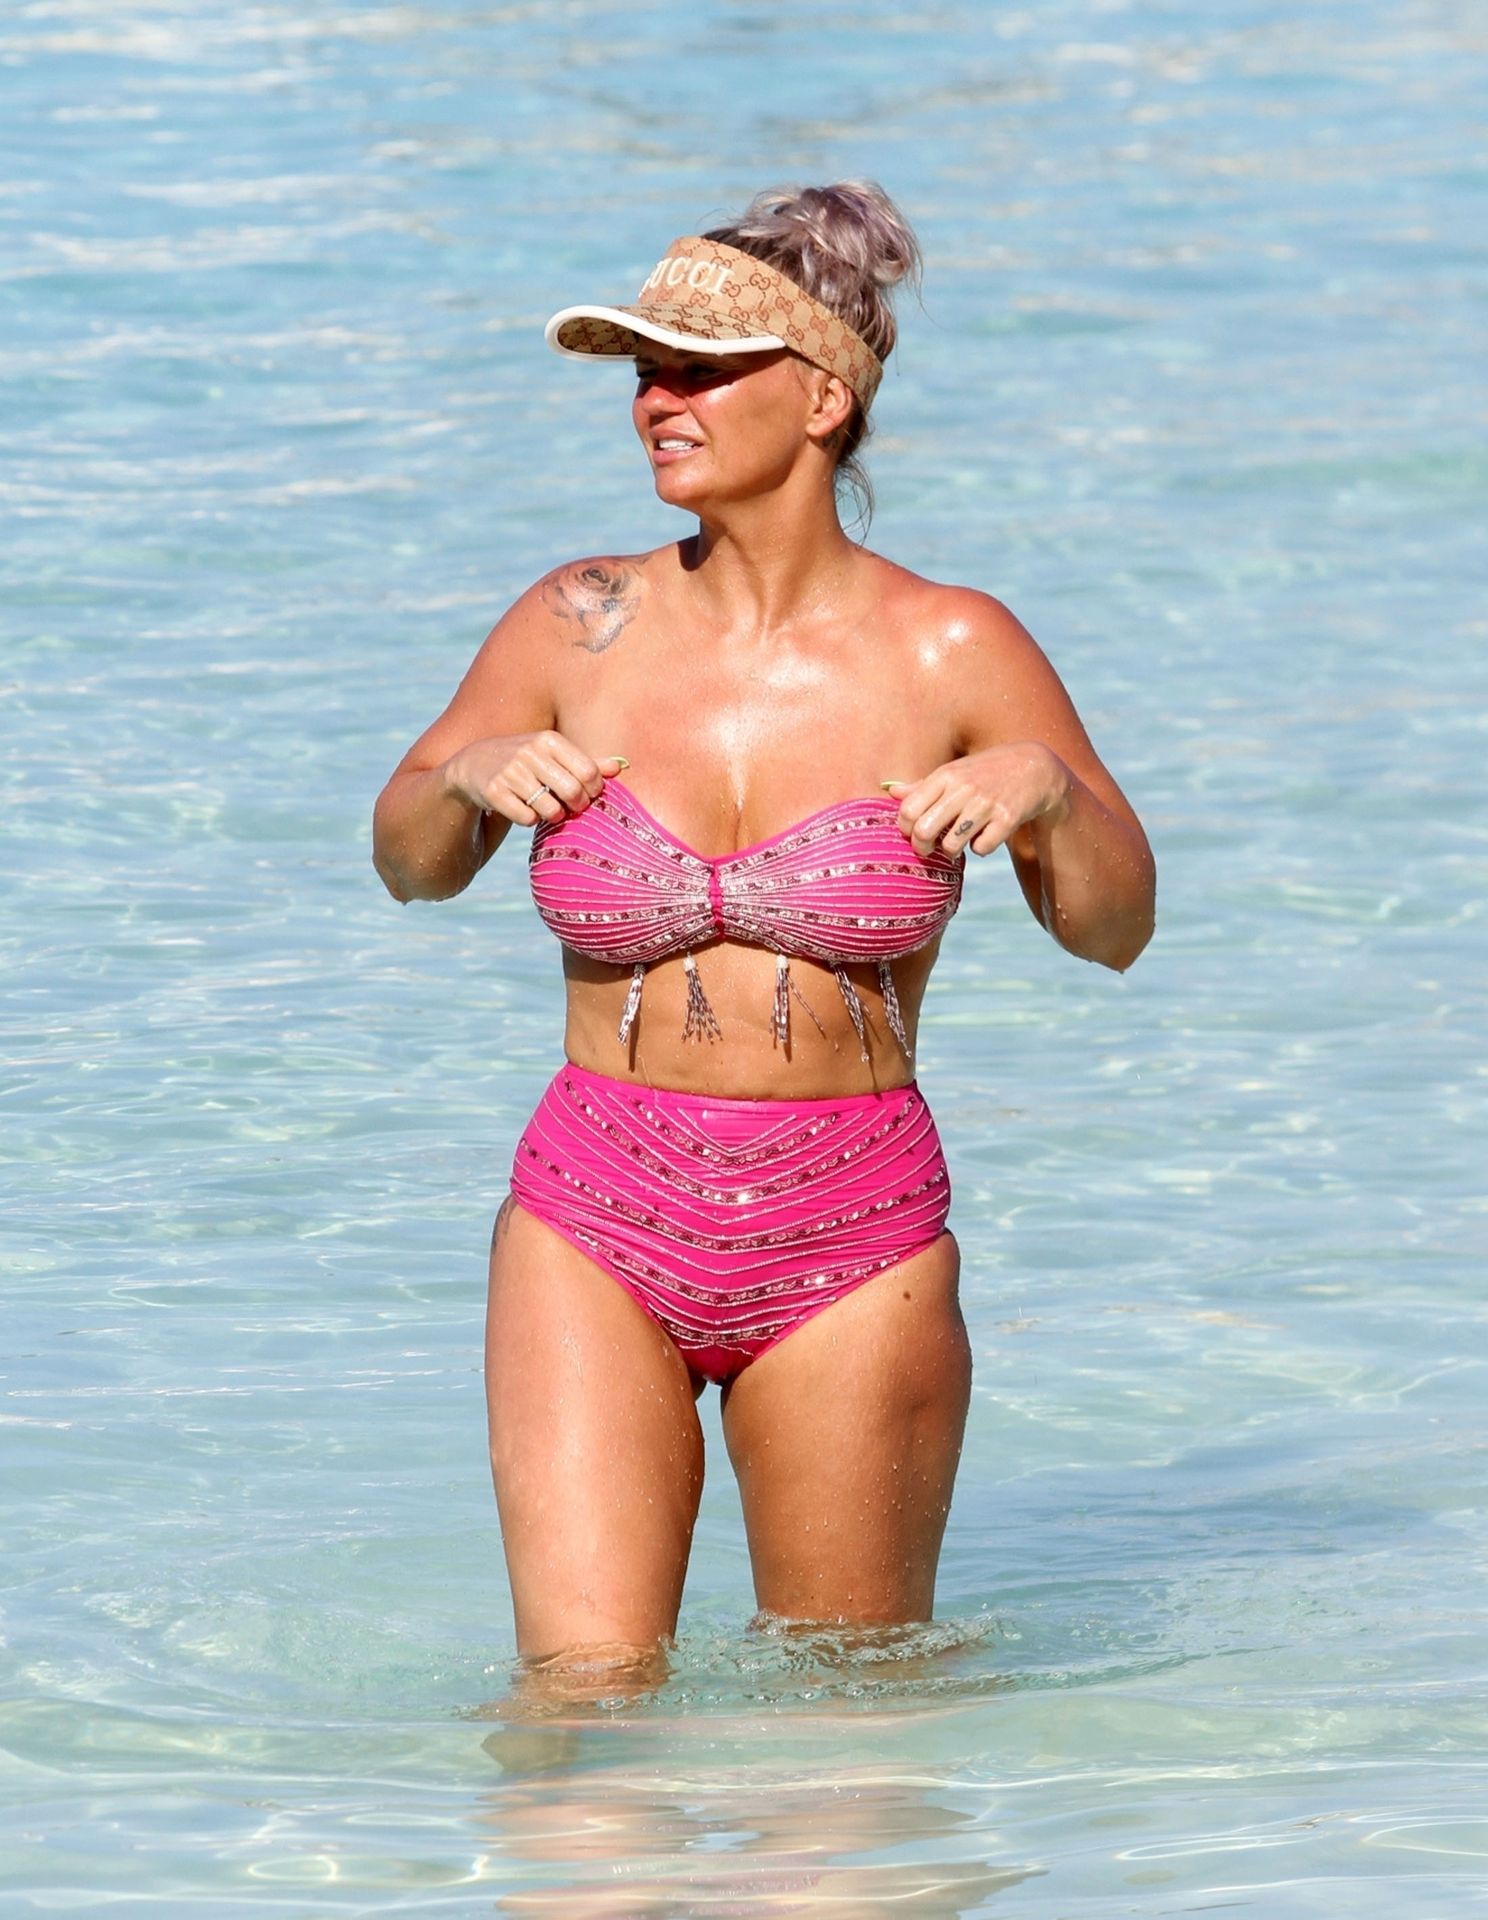 Kerry Katona Looks Stunning with Her New Sultry Physique (64 Photos)